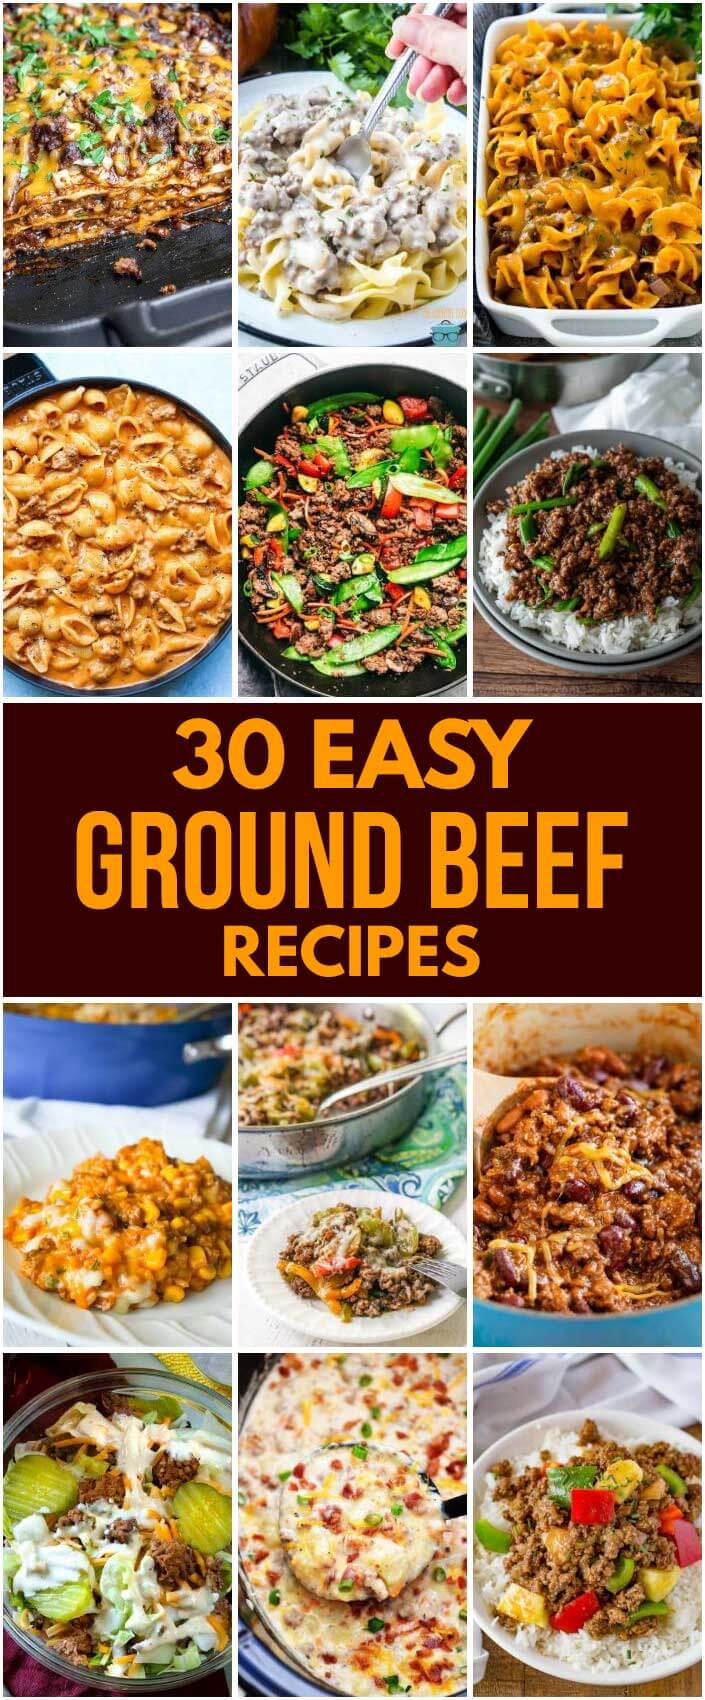 Here Are 30 Best Recipes For Ground Beef